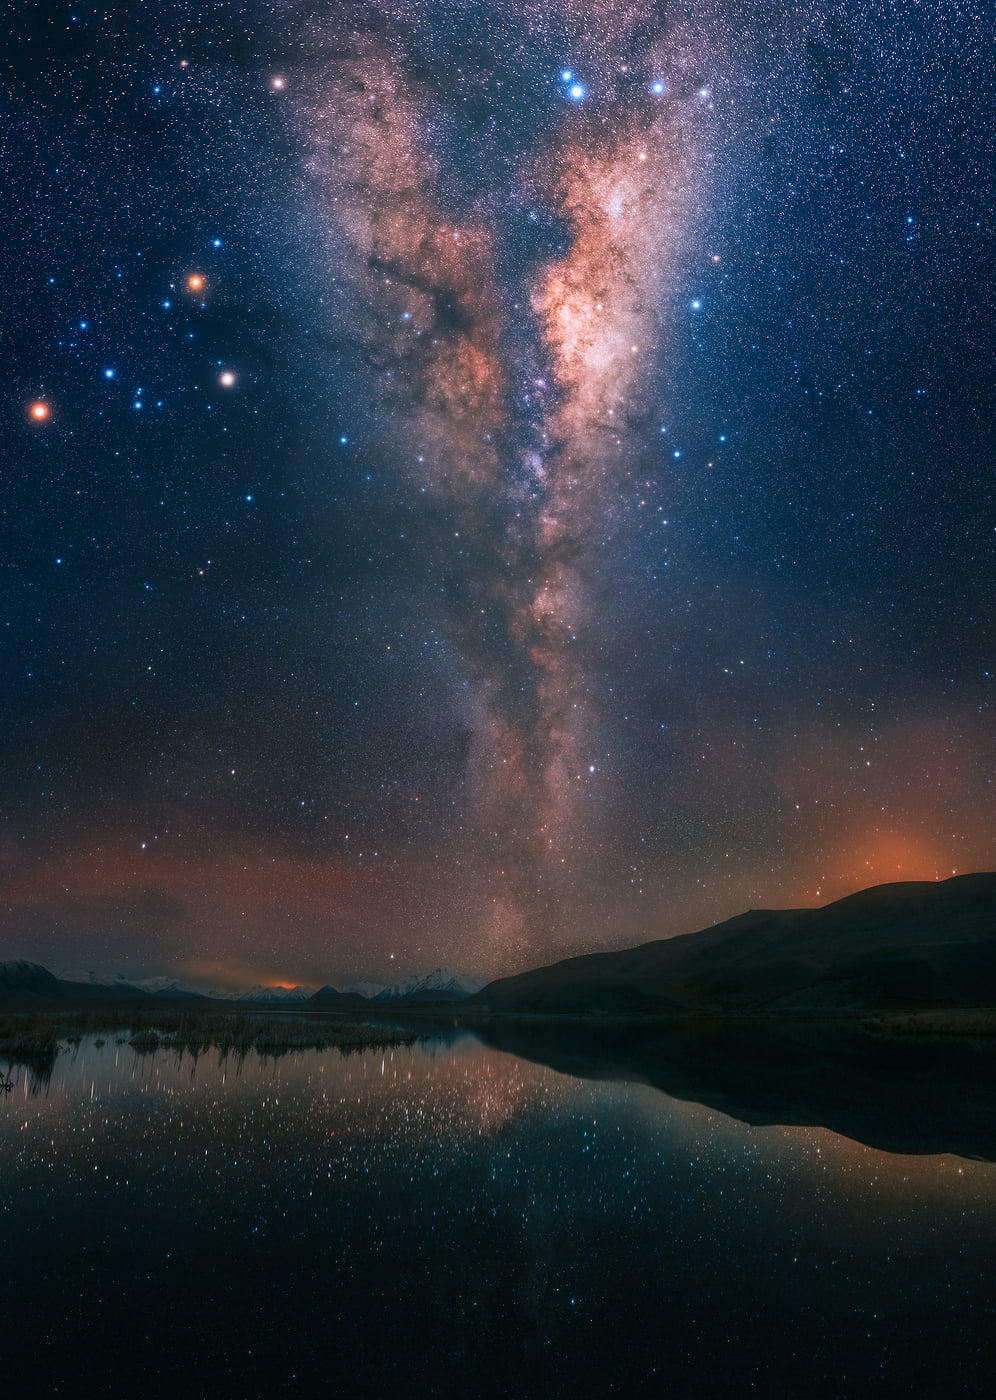 391 megapixels! A very high resolution, large-format VAST photo of the Milky Way, stars, and night sky over a lake, mountains, and grass; fine art landscape astrophotograph created by astrophotographer Paul Wilson in Maori Lakes, Canterbury, New Zealand.